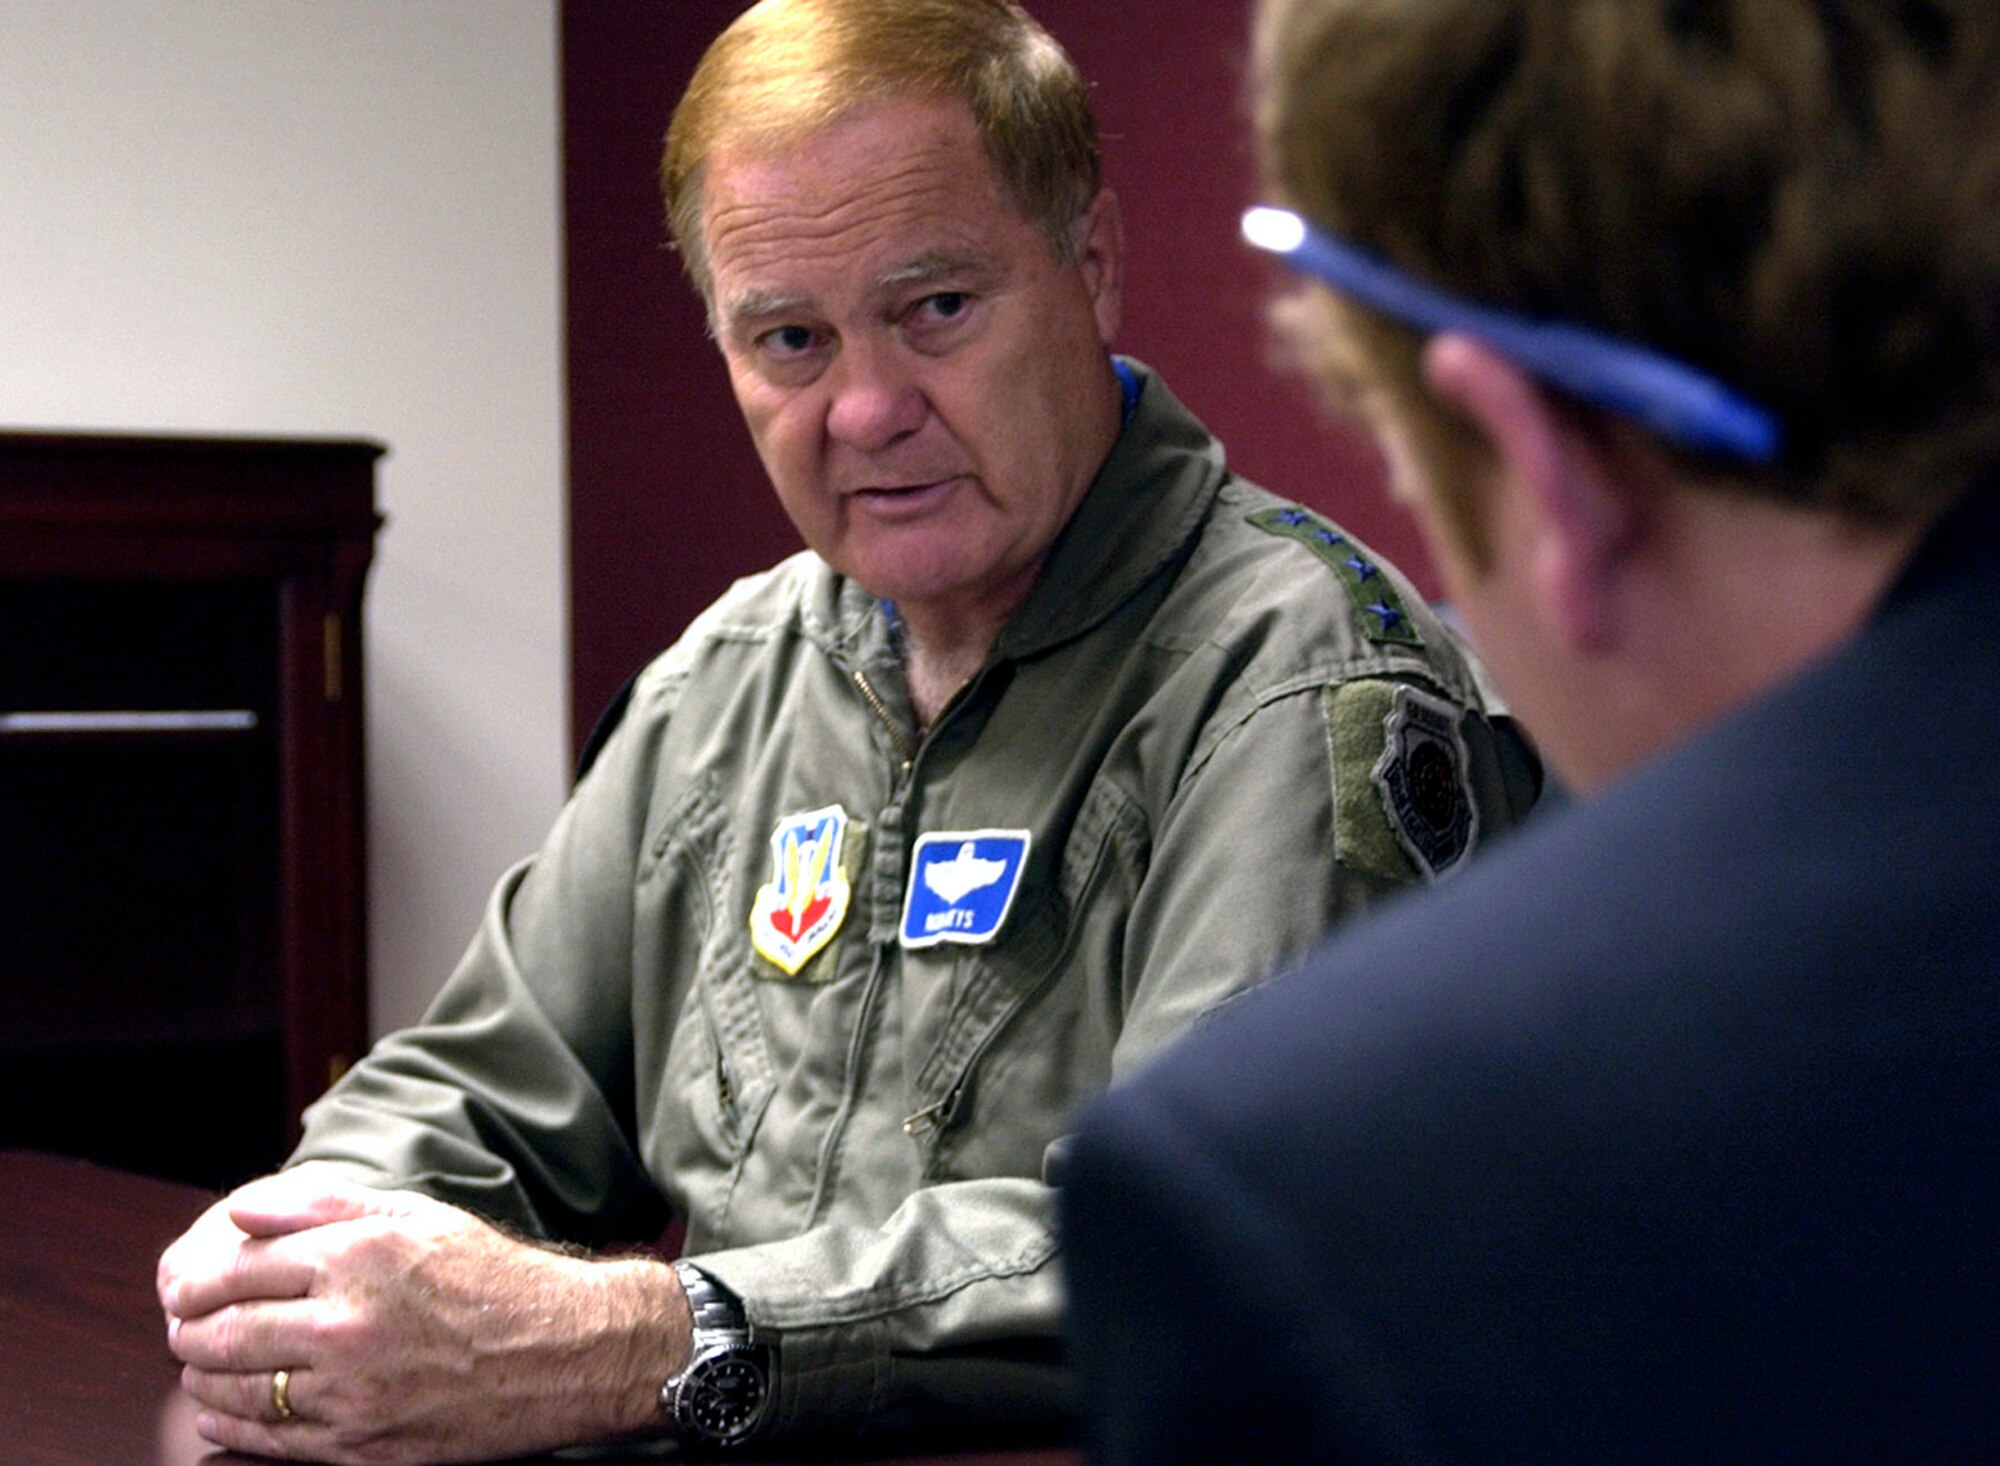 Gen. Ronald E. Keys outlines the strain put on equipment and Airmen by increased operations tempo during an interview May 14 at Offutt Air Force Base, Neb. General Keys is the Air Combat Command commander, in charge of the primary force provider of combat airpower to America's warfighting commands. He plans to retire this fall. (U.S. Air Force photo/Tech. Sgt. A.J. Bosker)